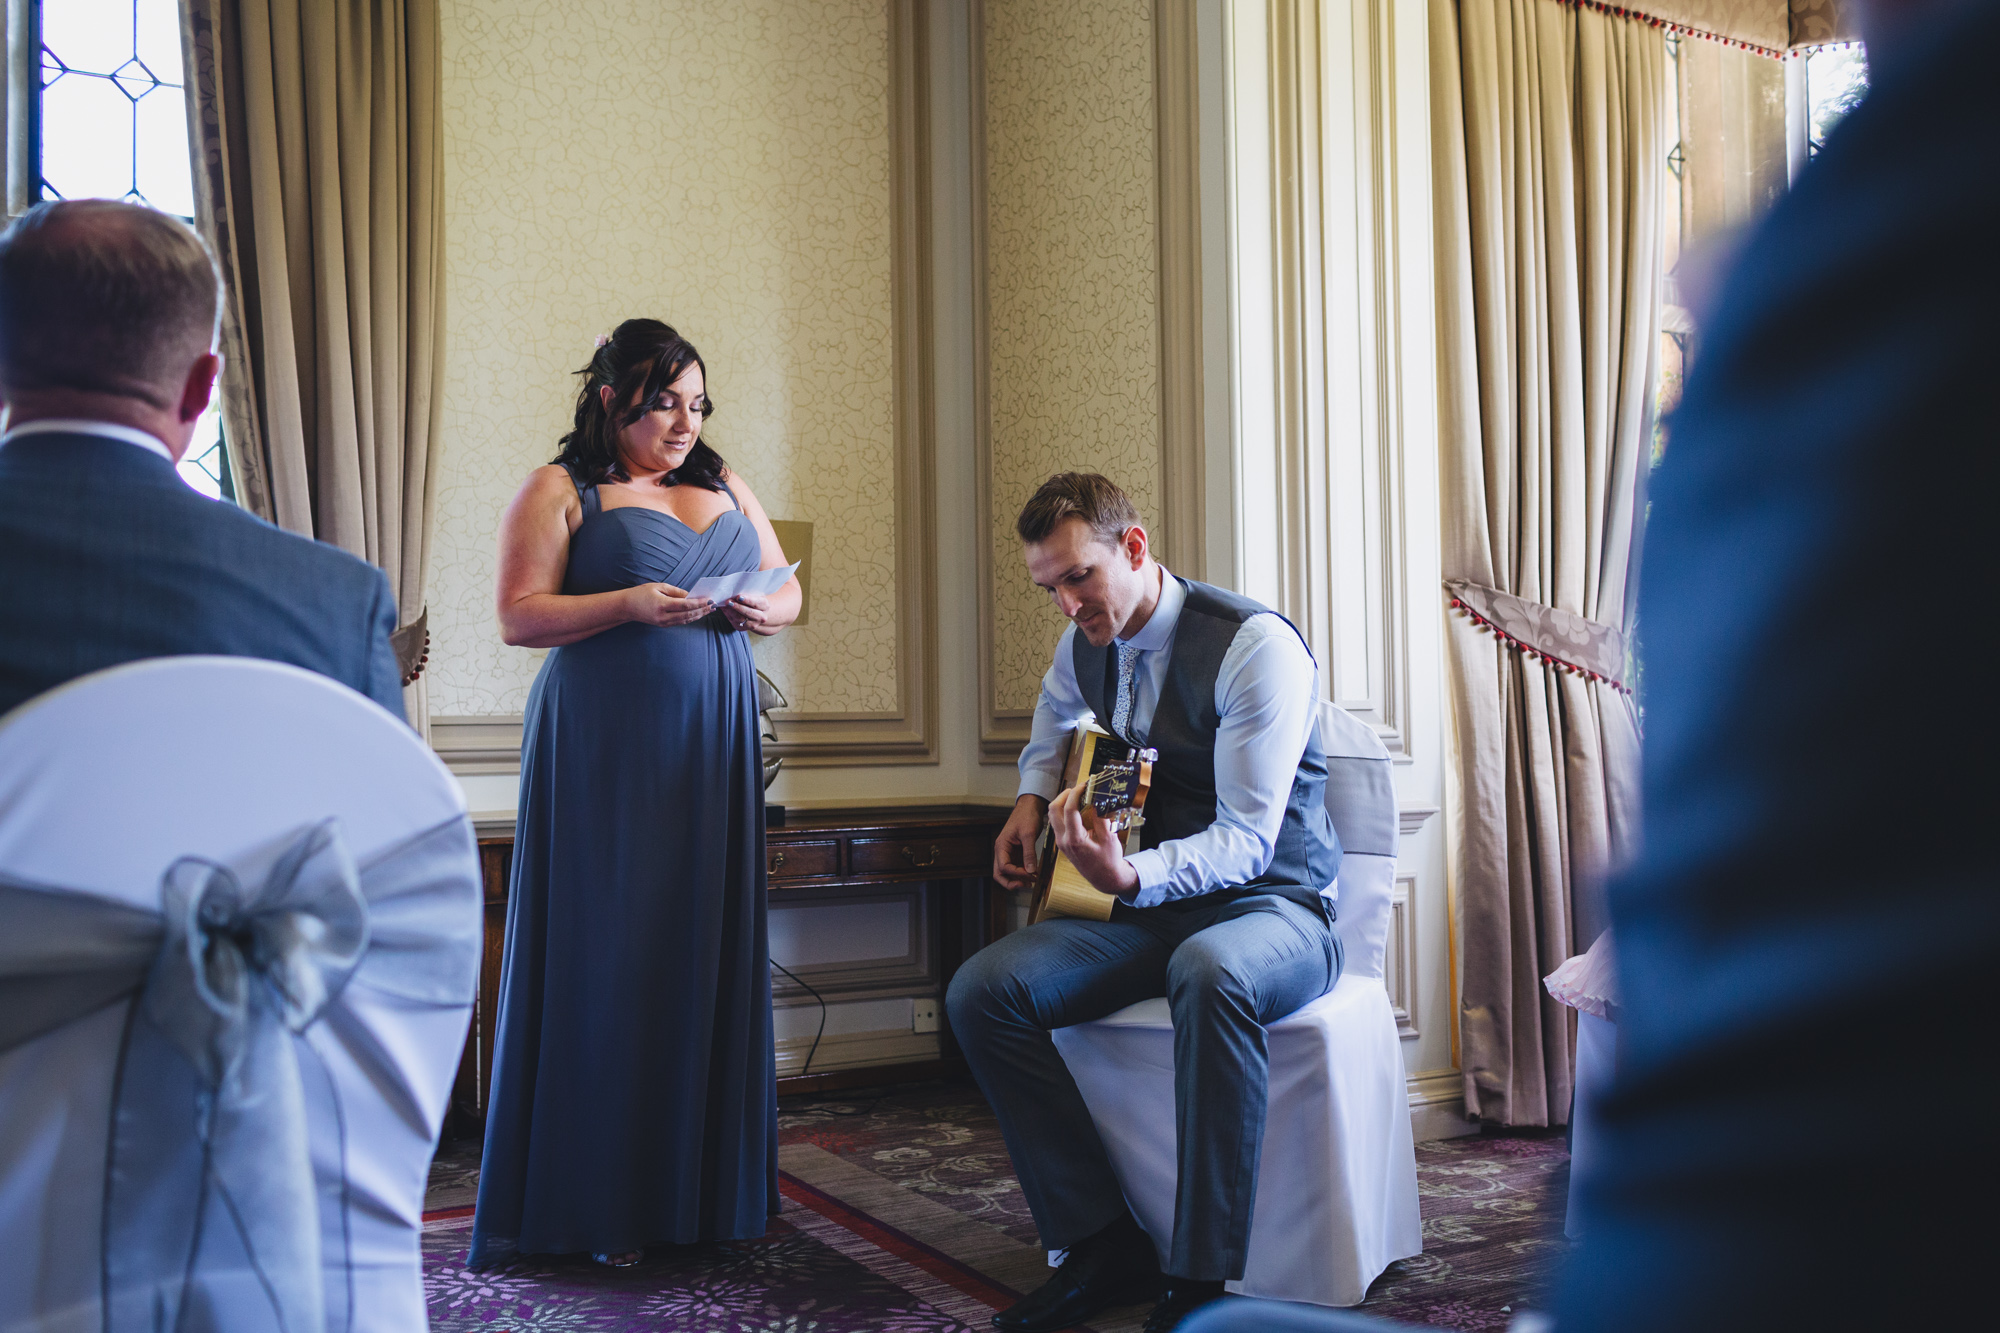 music at wedding ceremony captured by south wales wedding photographer, cardiff